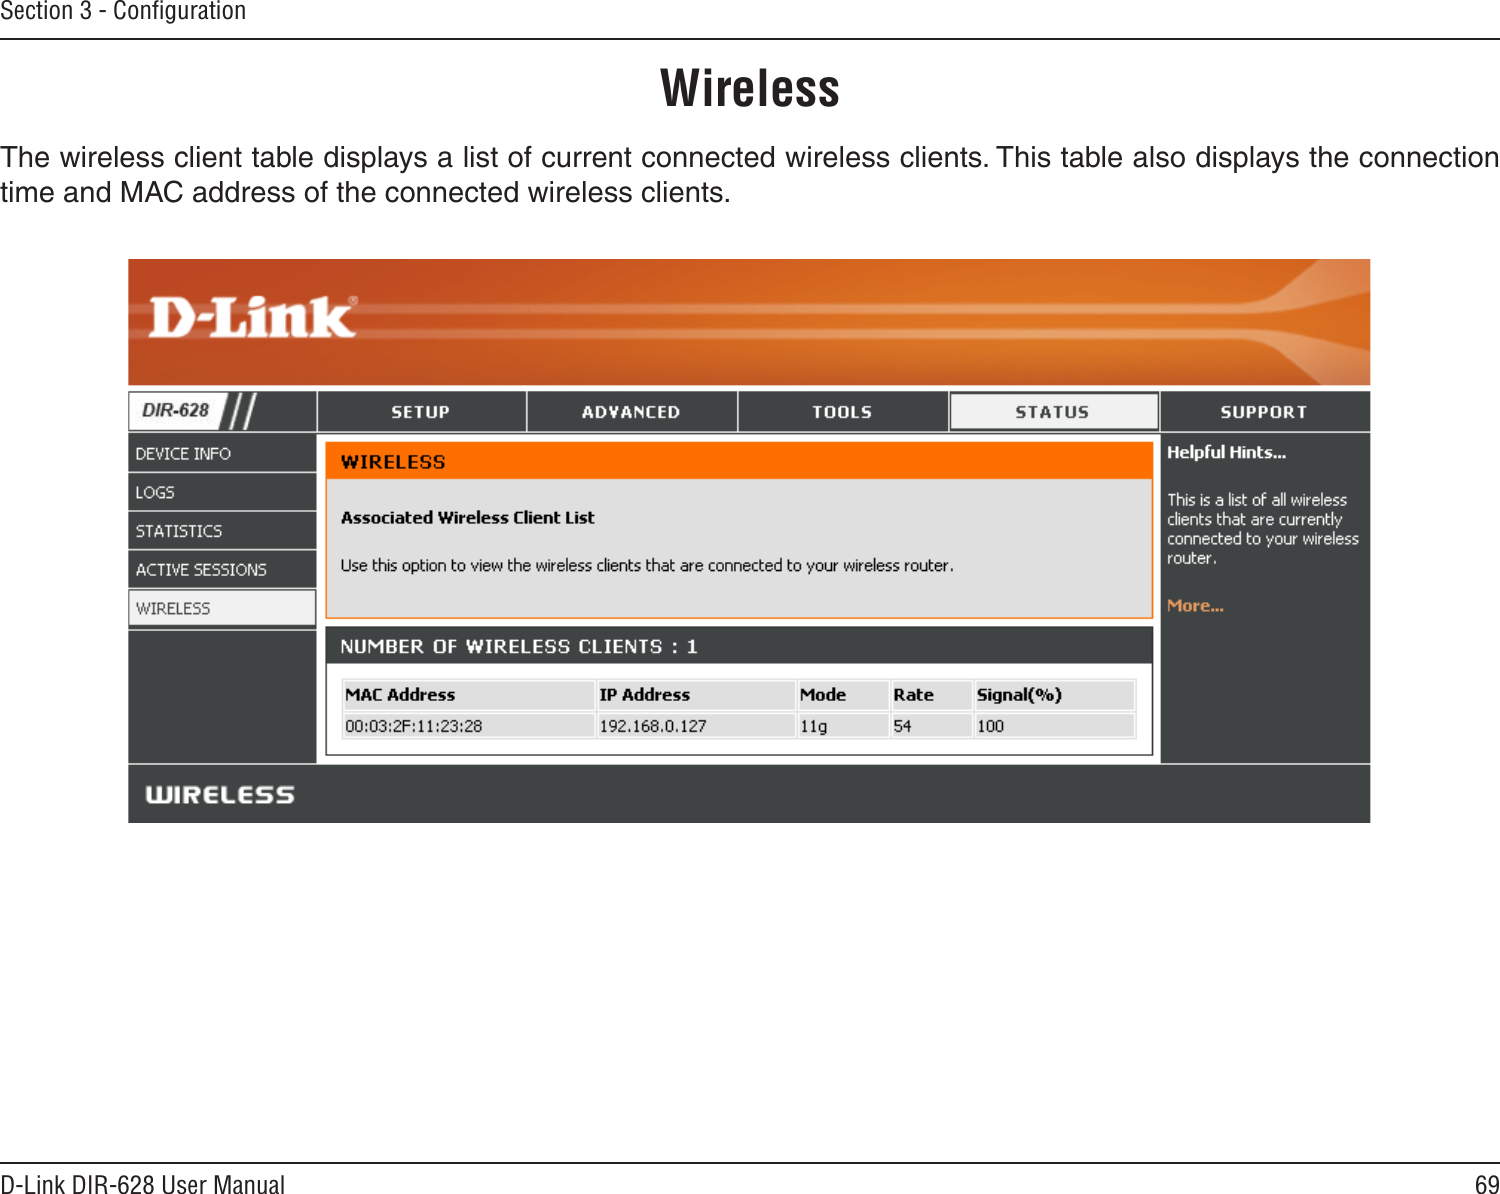 69D-Link DIR-628 User ManualSection 3 - ConﬁgurationThe wireless client table displays a list of current connected wireless clients. This table also displays the connection time and MAC address of the connected wireless clients.Wireless